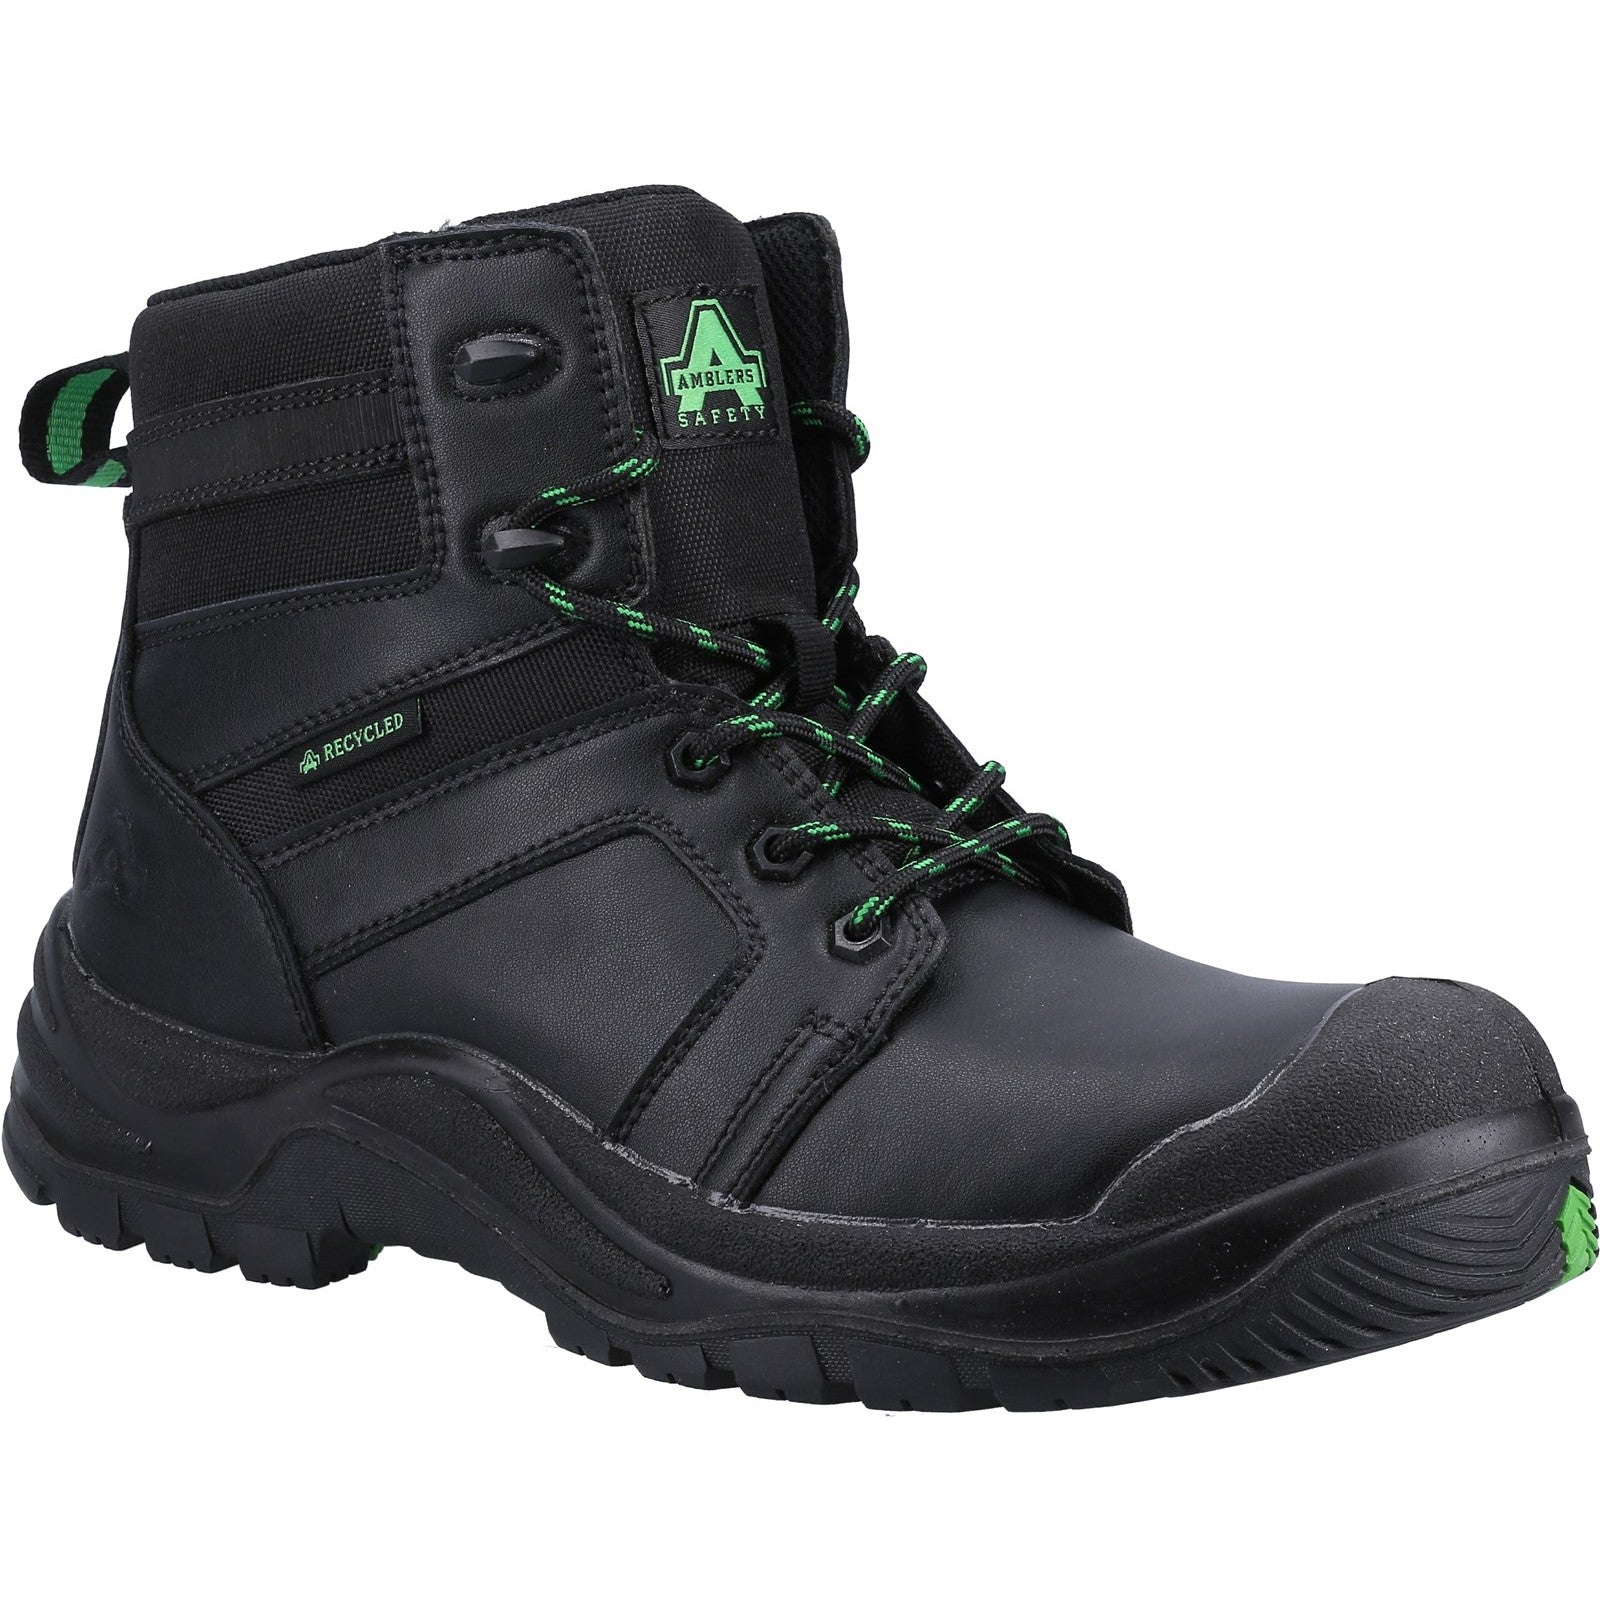 Amblers 502 Safety Boots - Black